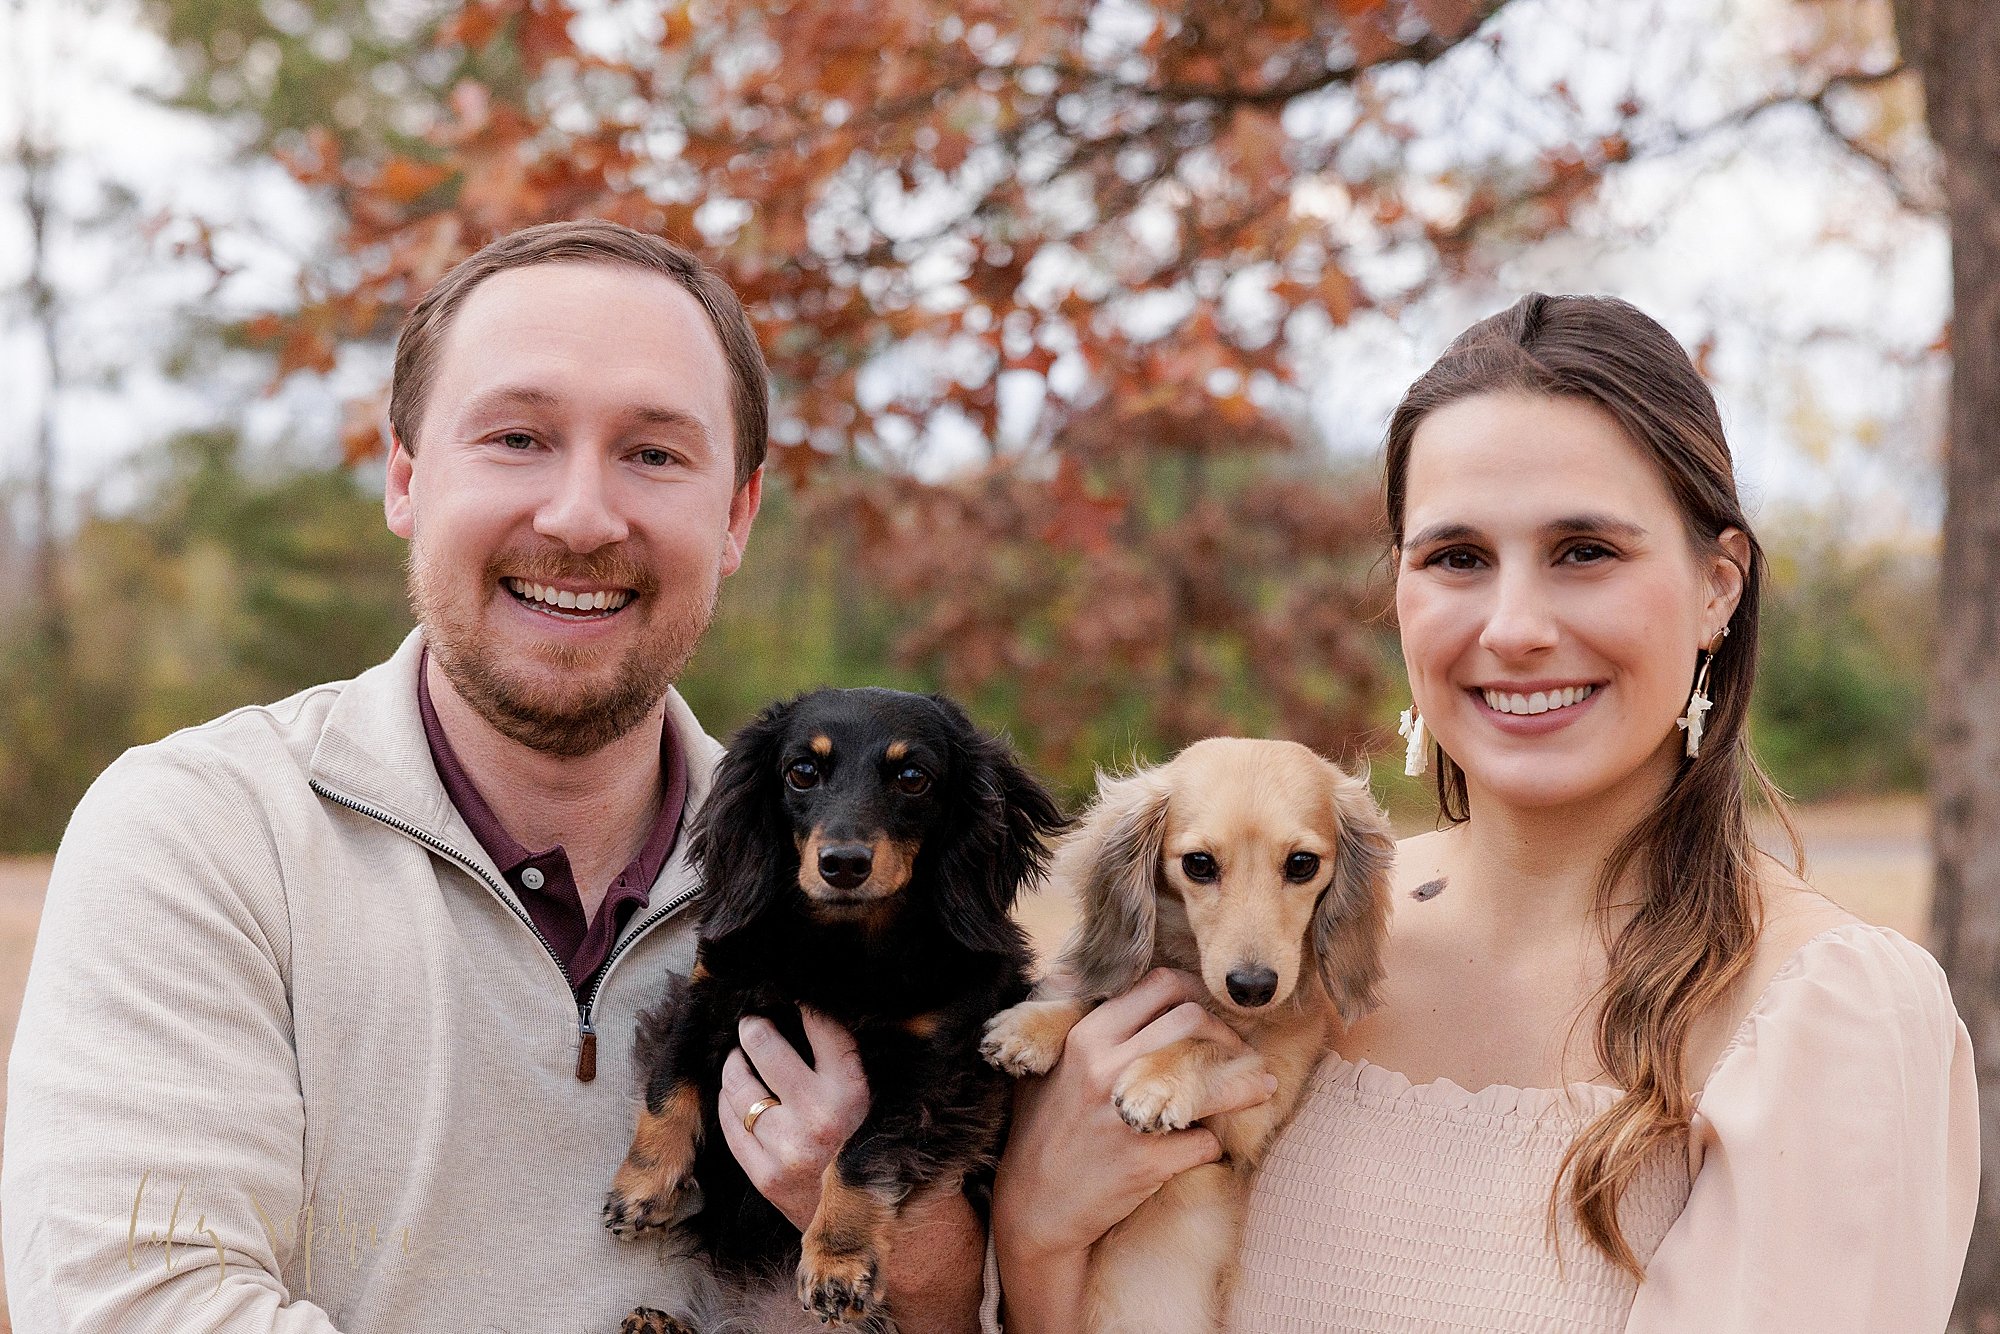 intown-atlanta-morningside-decatur-brookhaven-buckhead-outdoor-couples-maternity-fall-photoshoot-daschunds-doxies-gender-reveal_6196.jpg